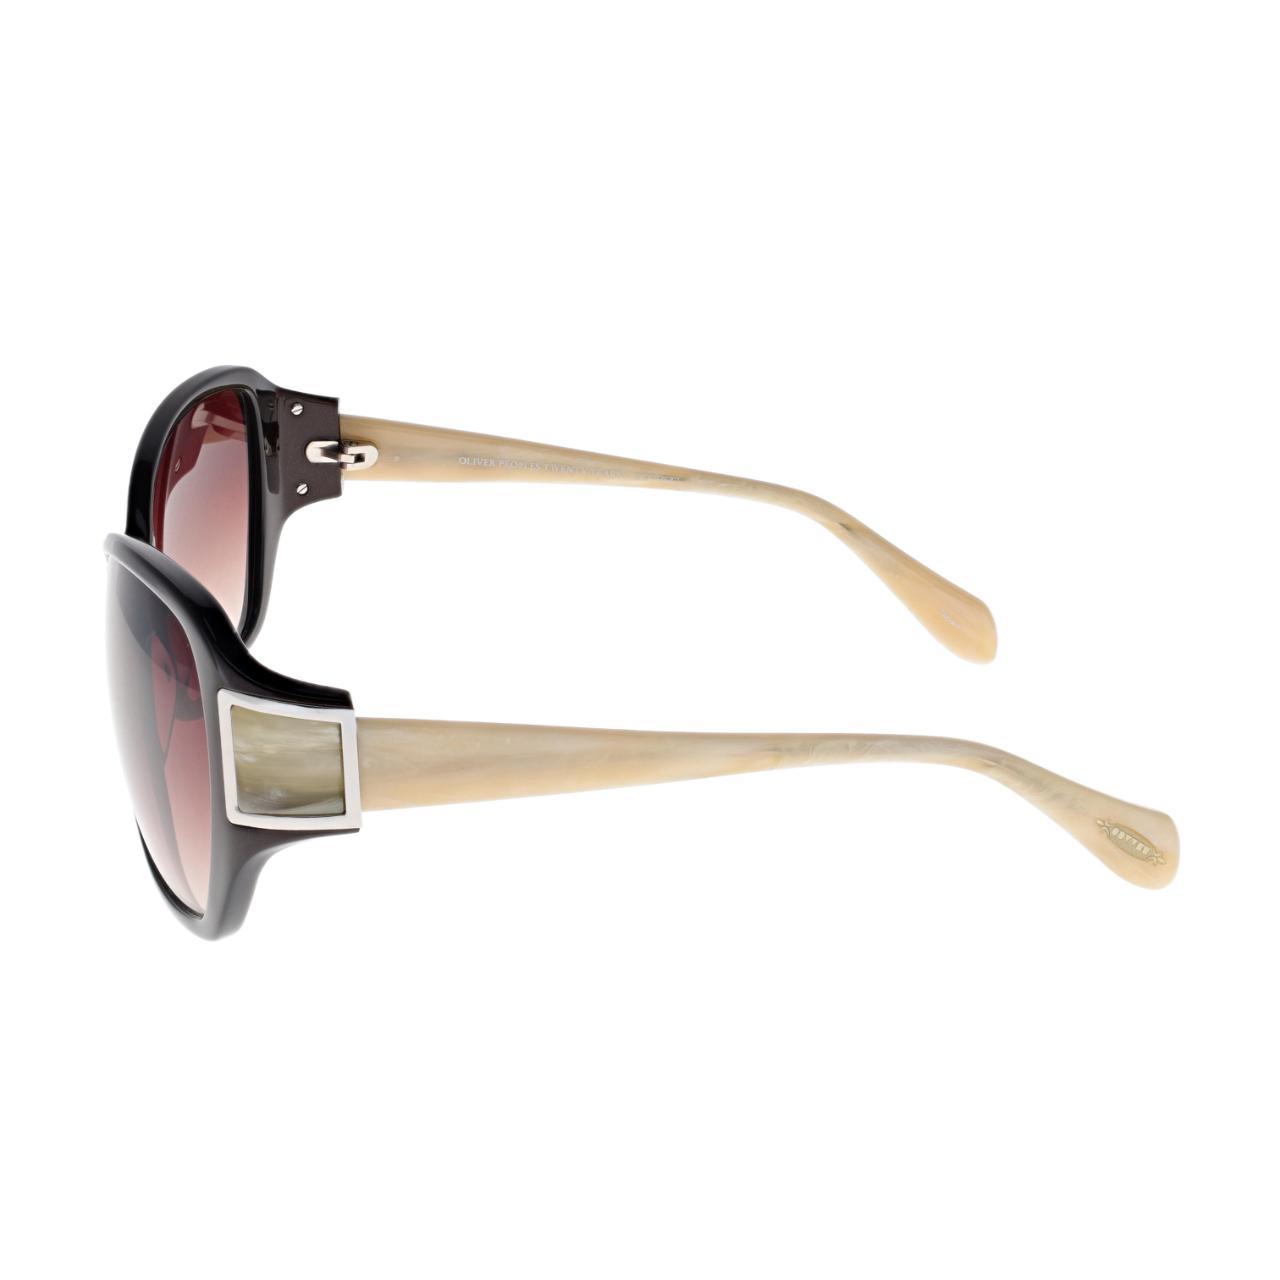 Oliver Peoples Women's Black and Cream Sunglasses (3)